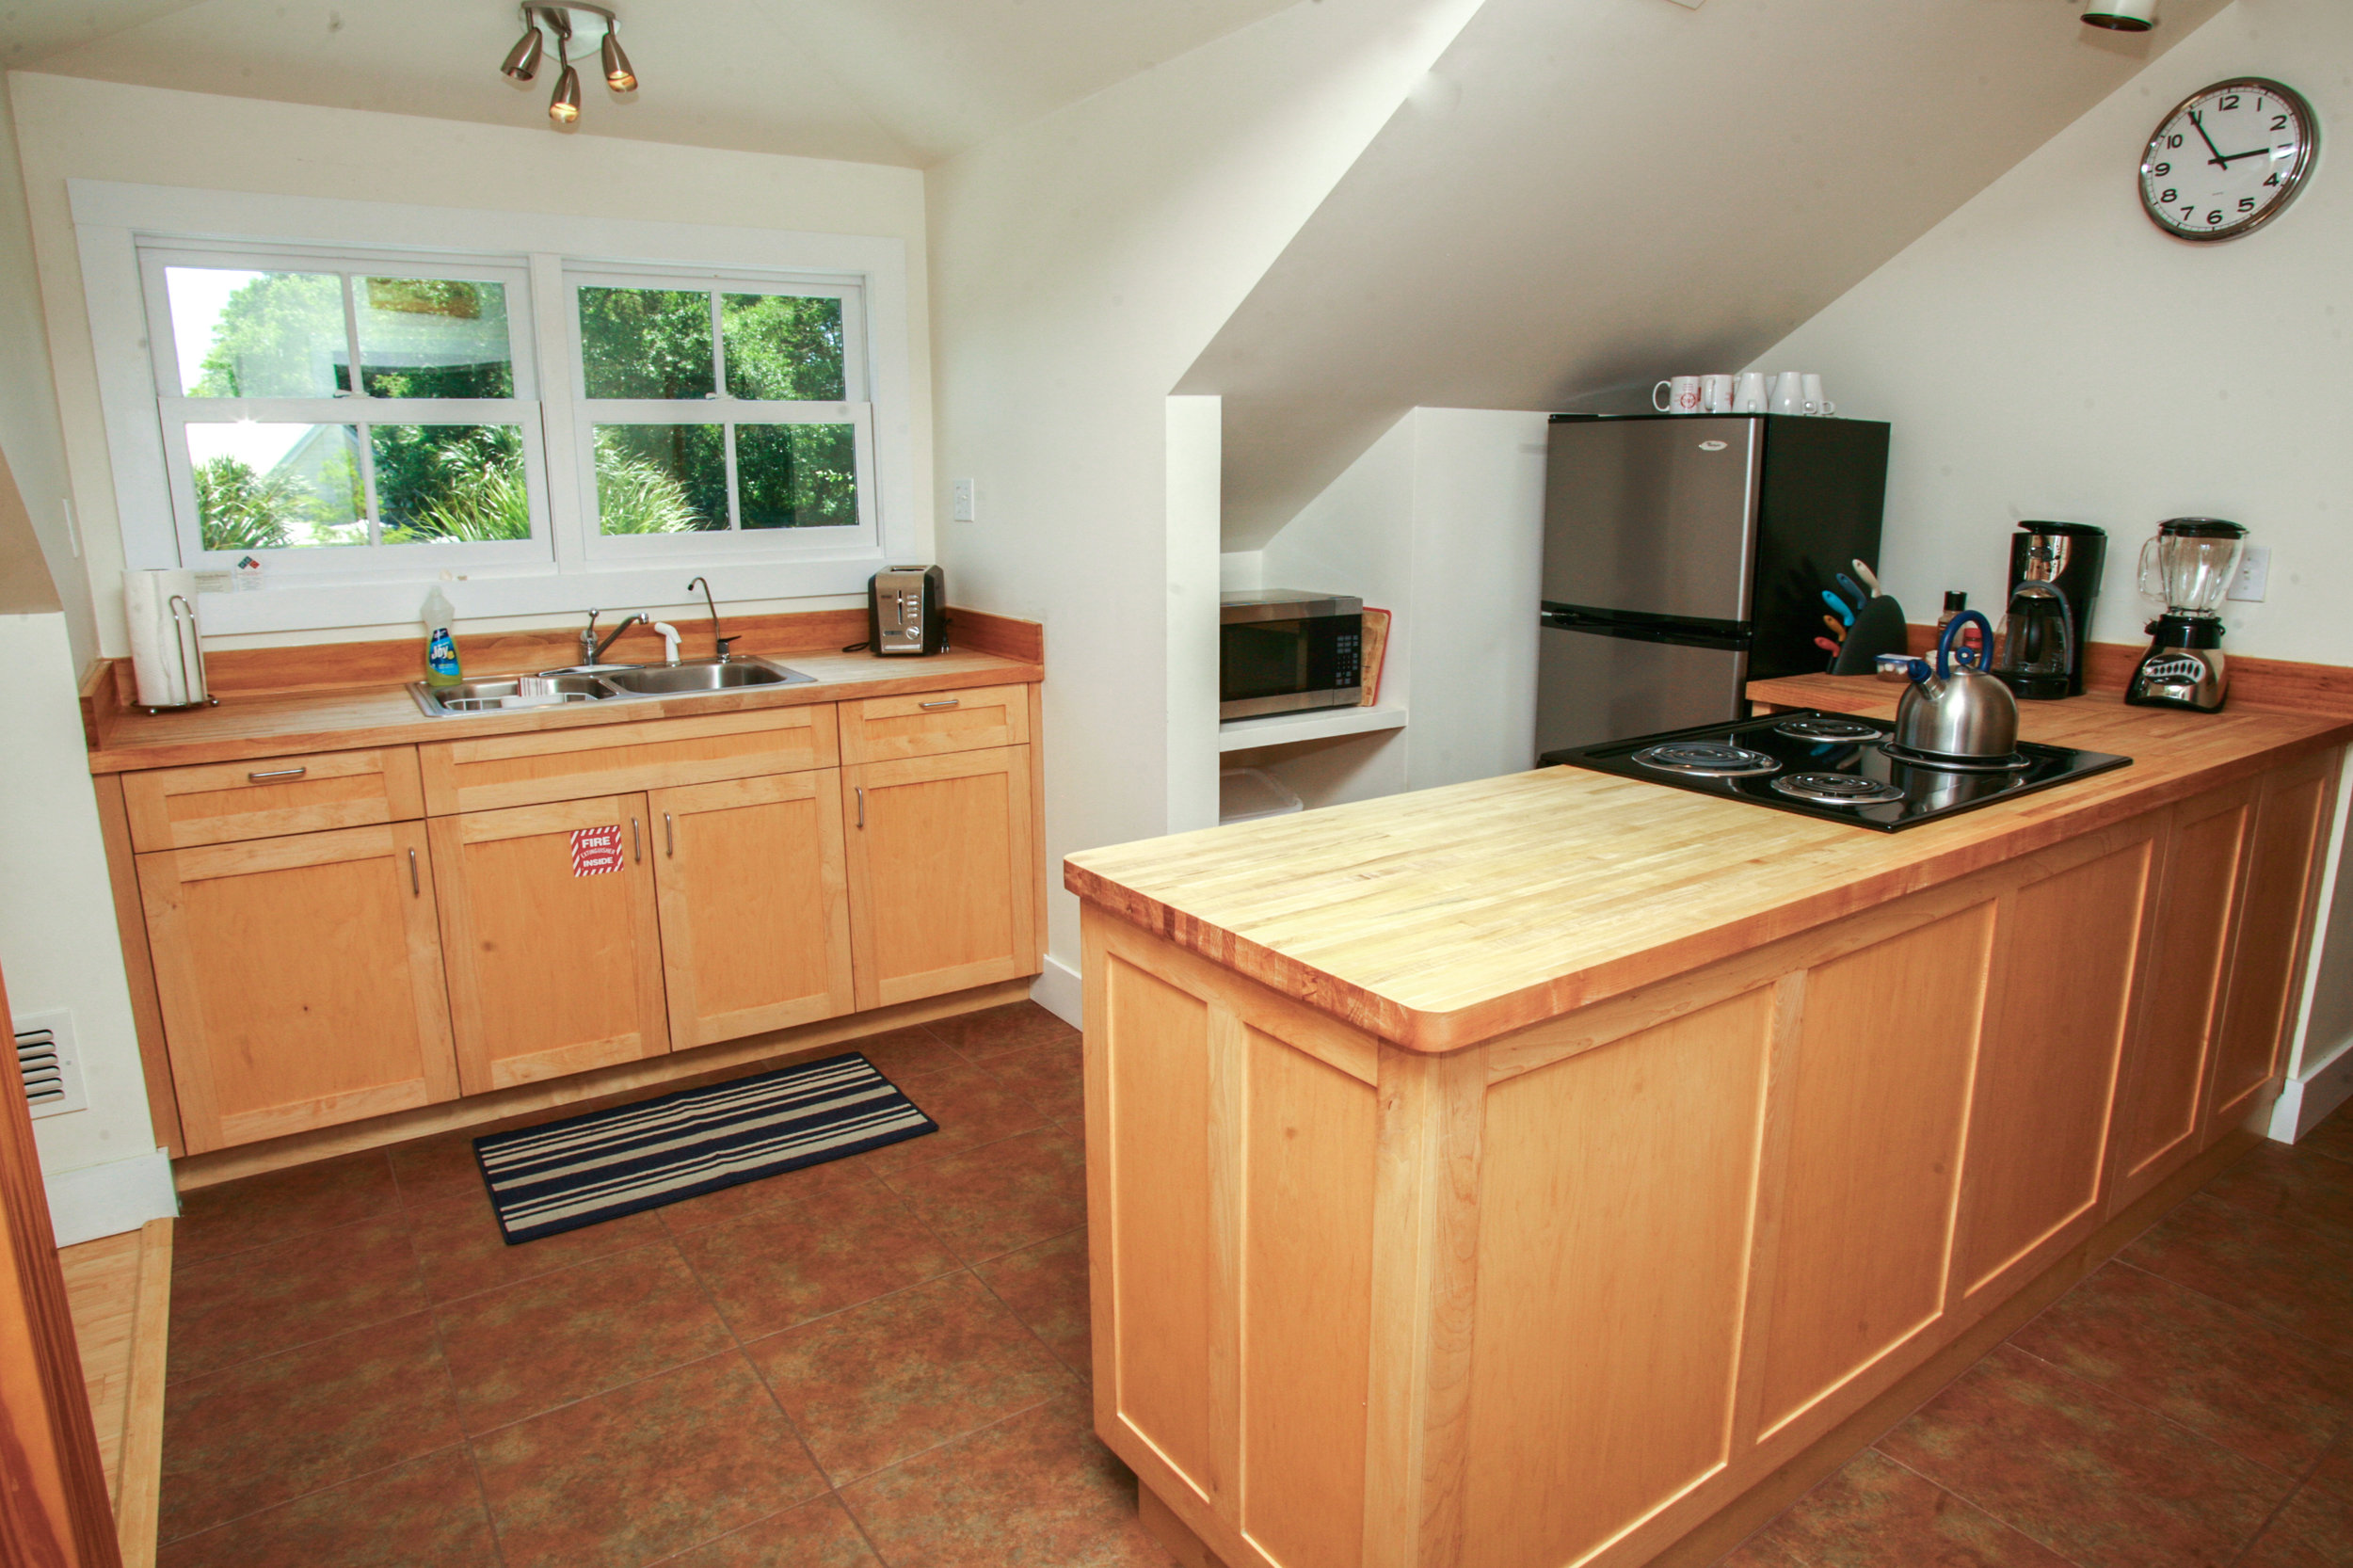 Fully equipped kitchen with loads of sunlight! All custom cabinetry.